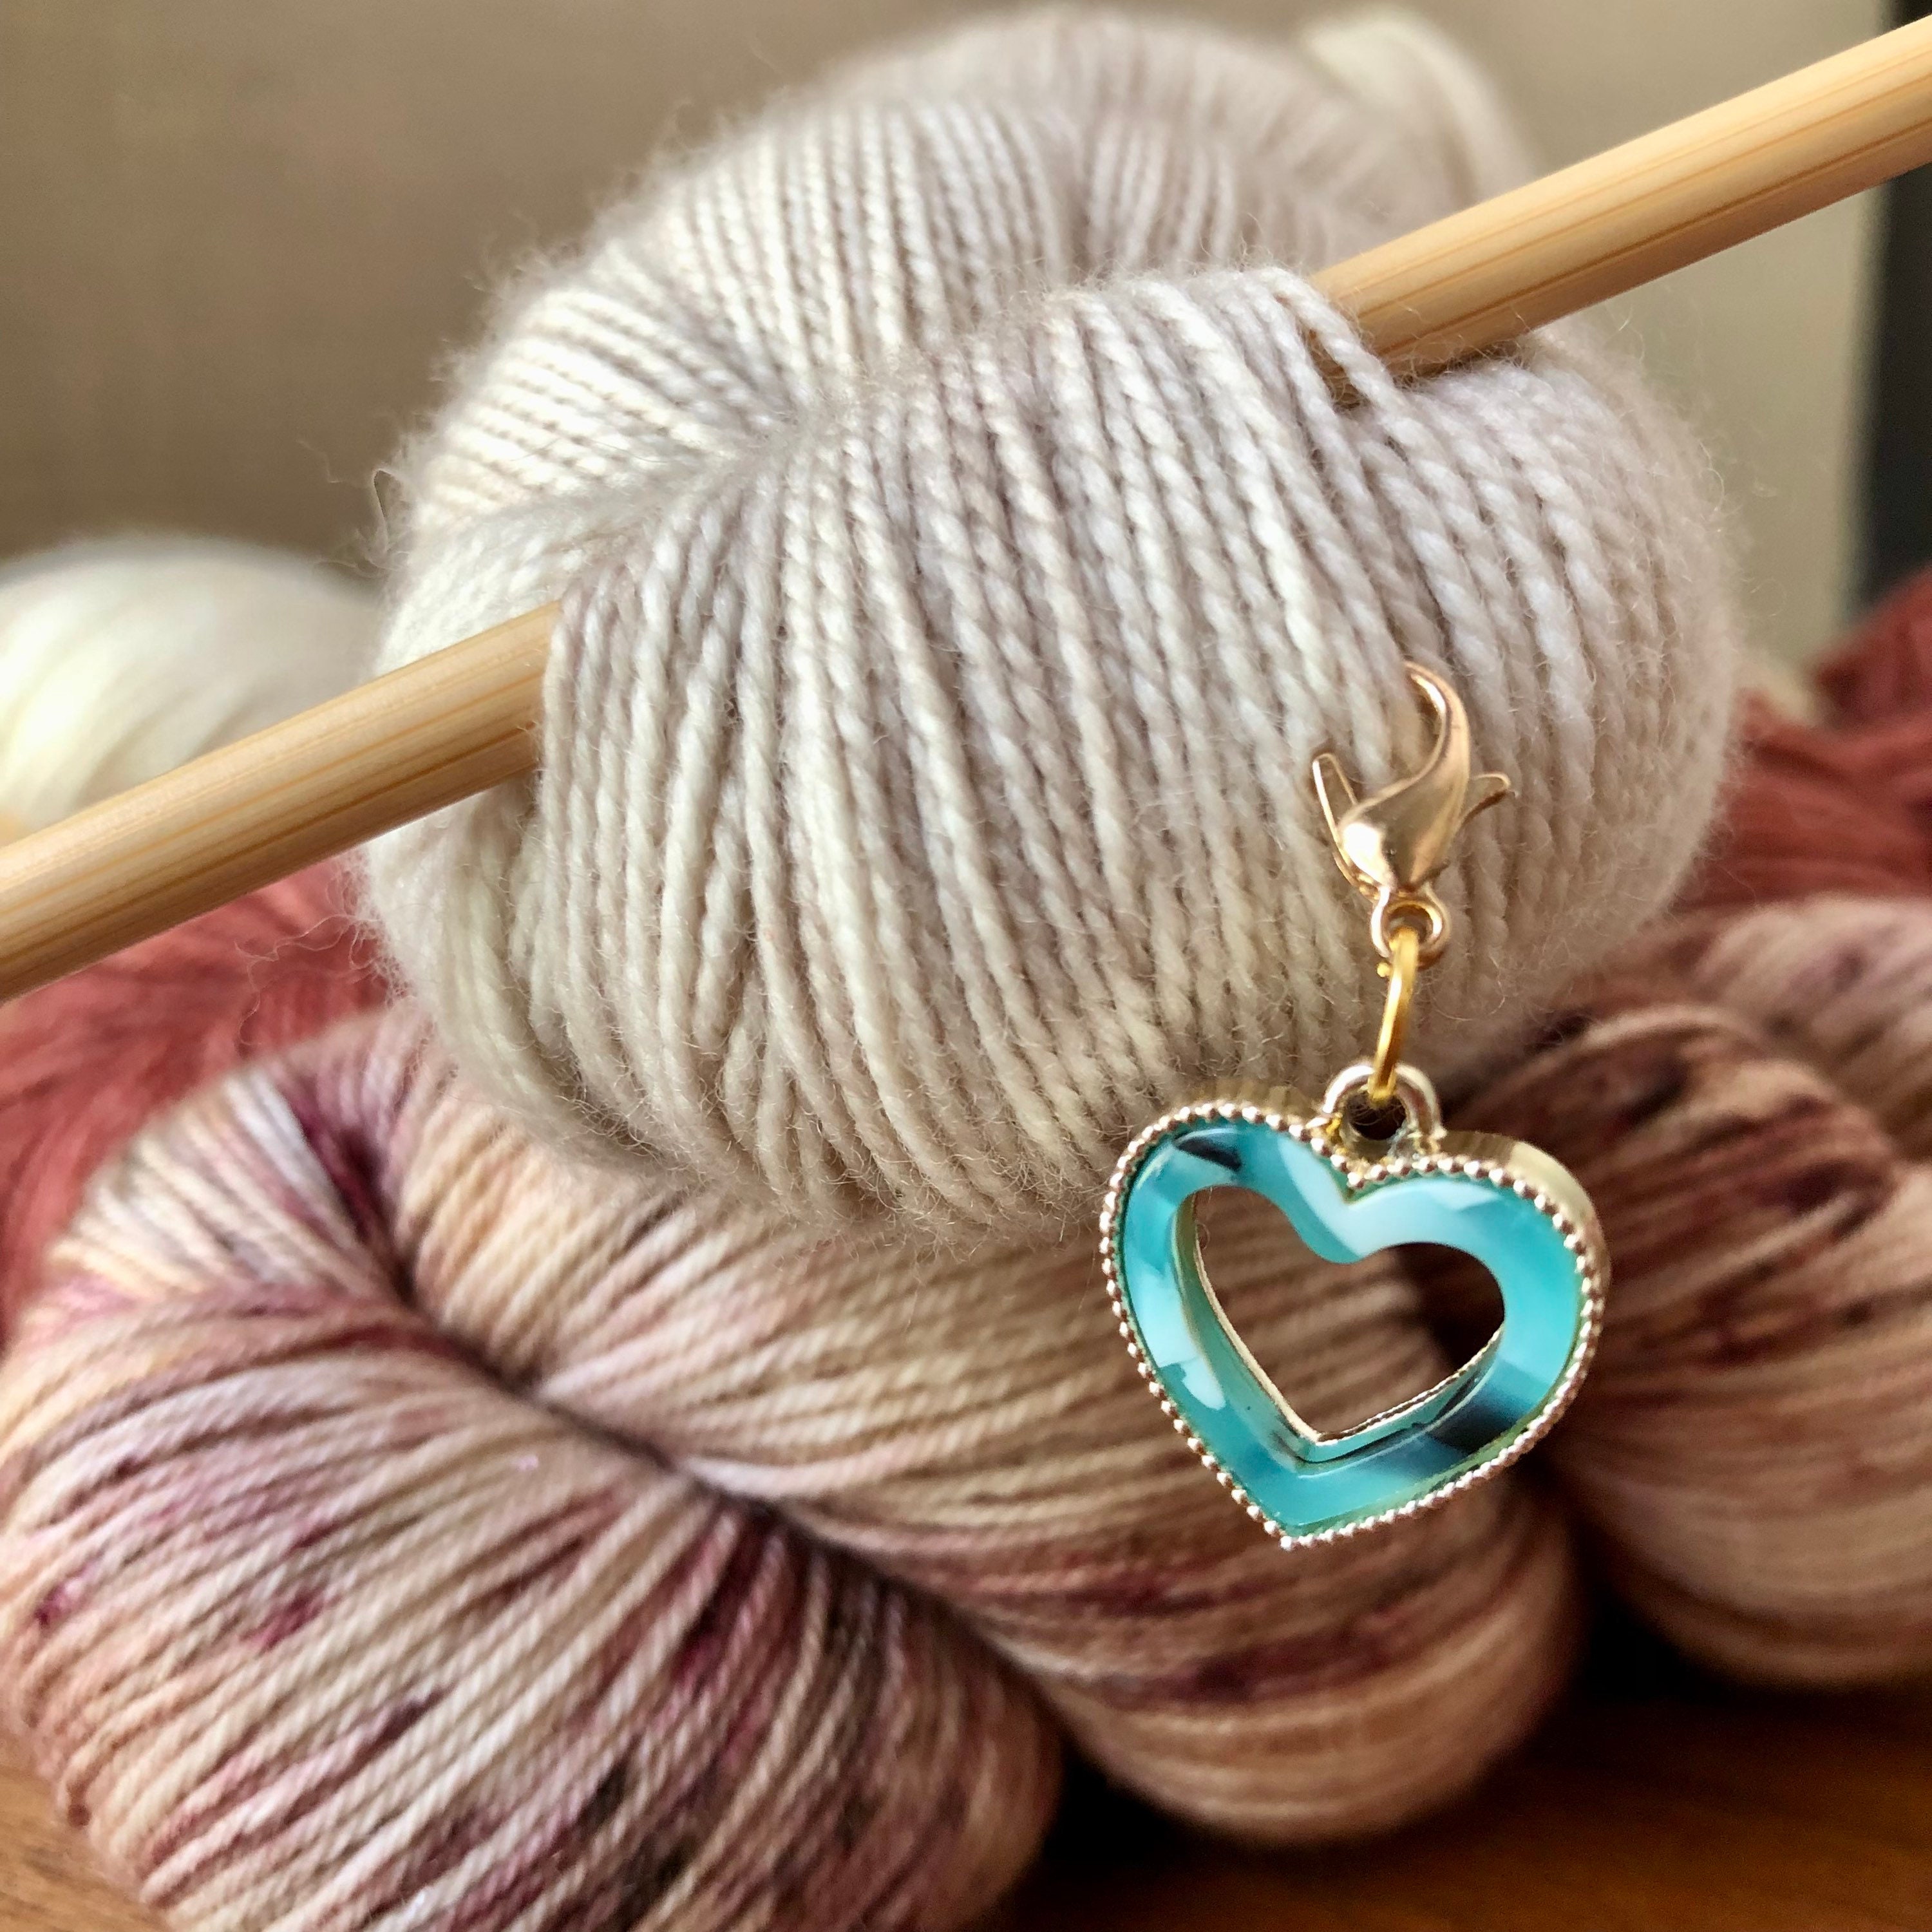 Metal Crochet Stitch Markers For DIY Knitting Heart Shaped Stitch